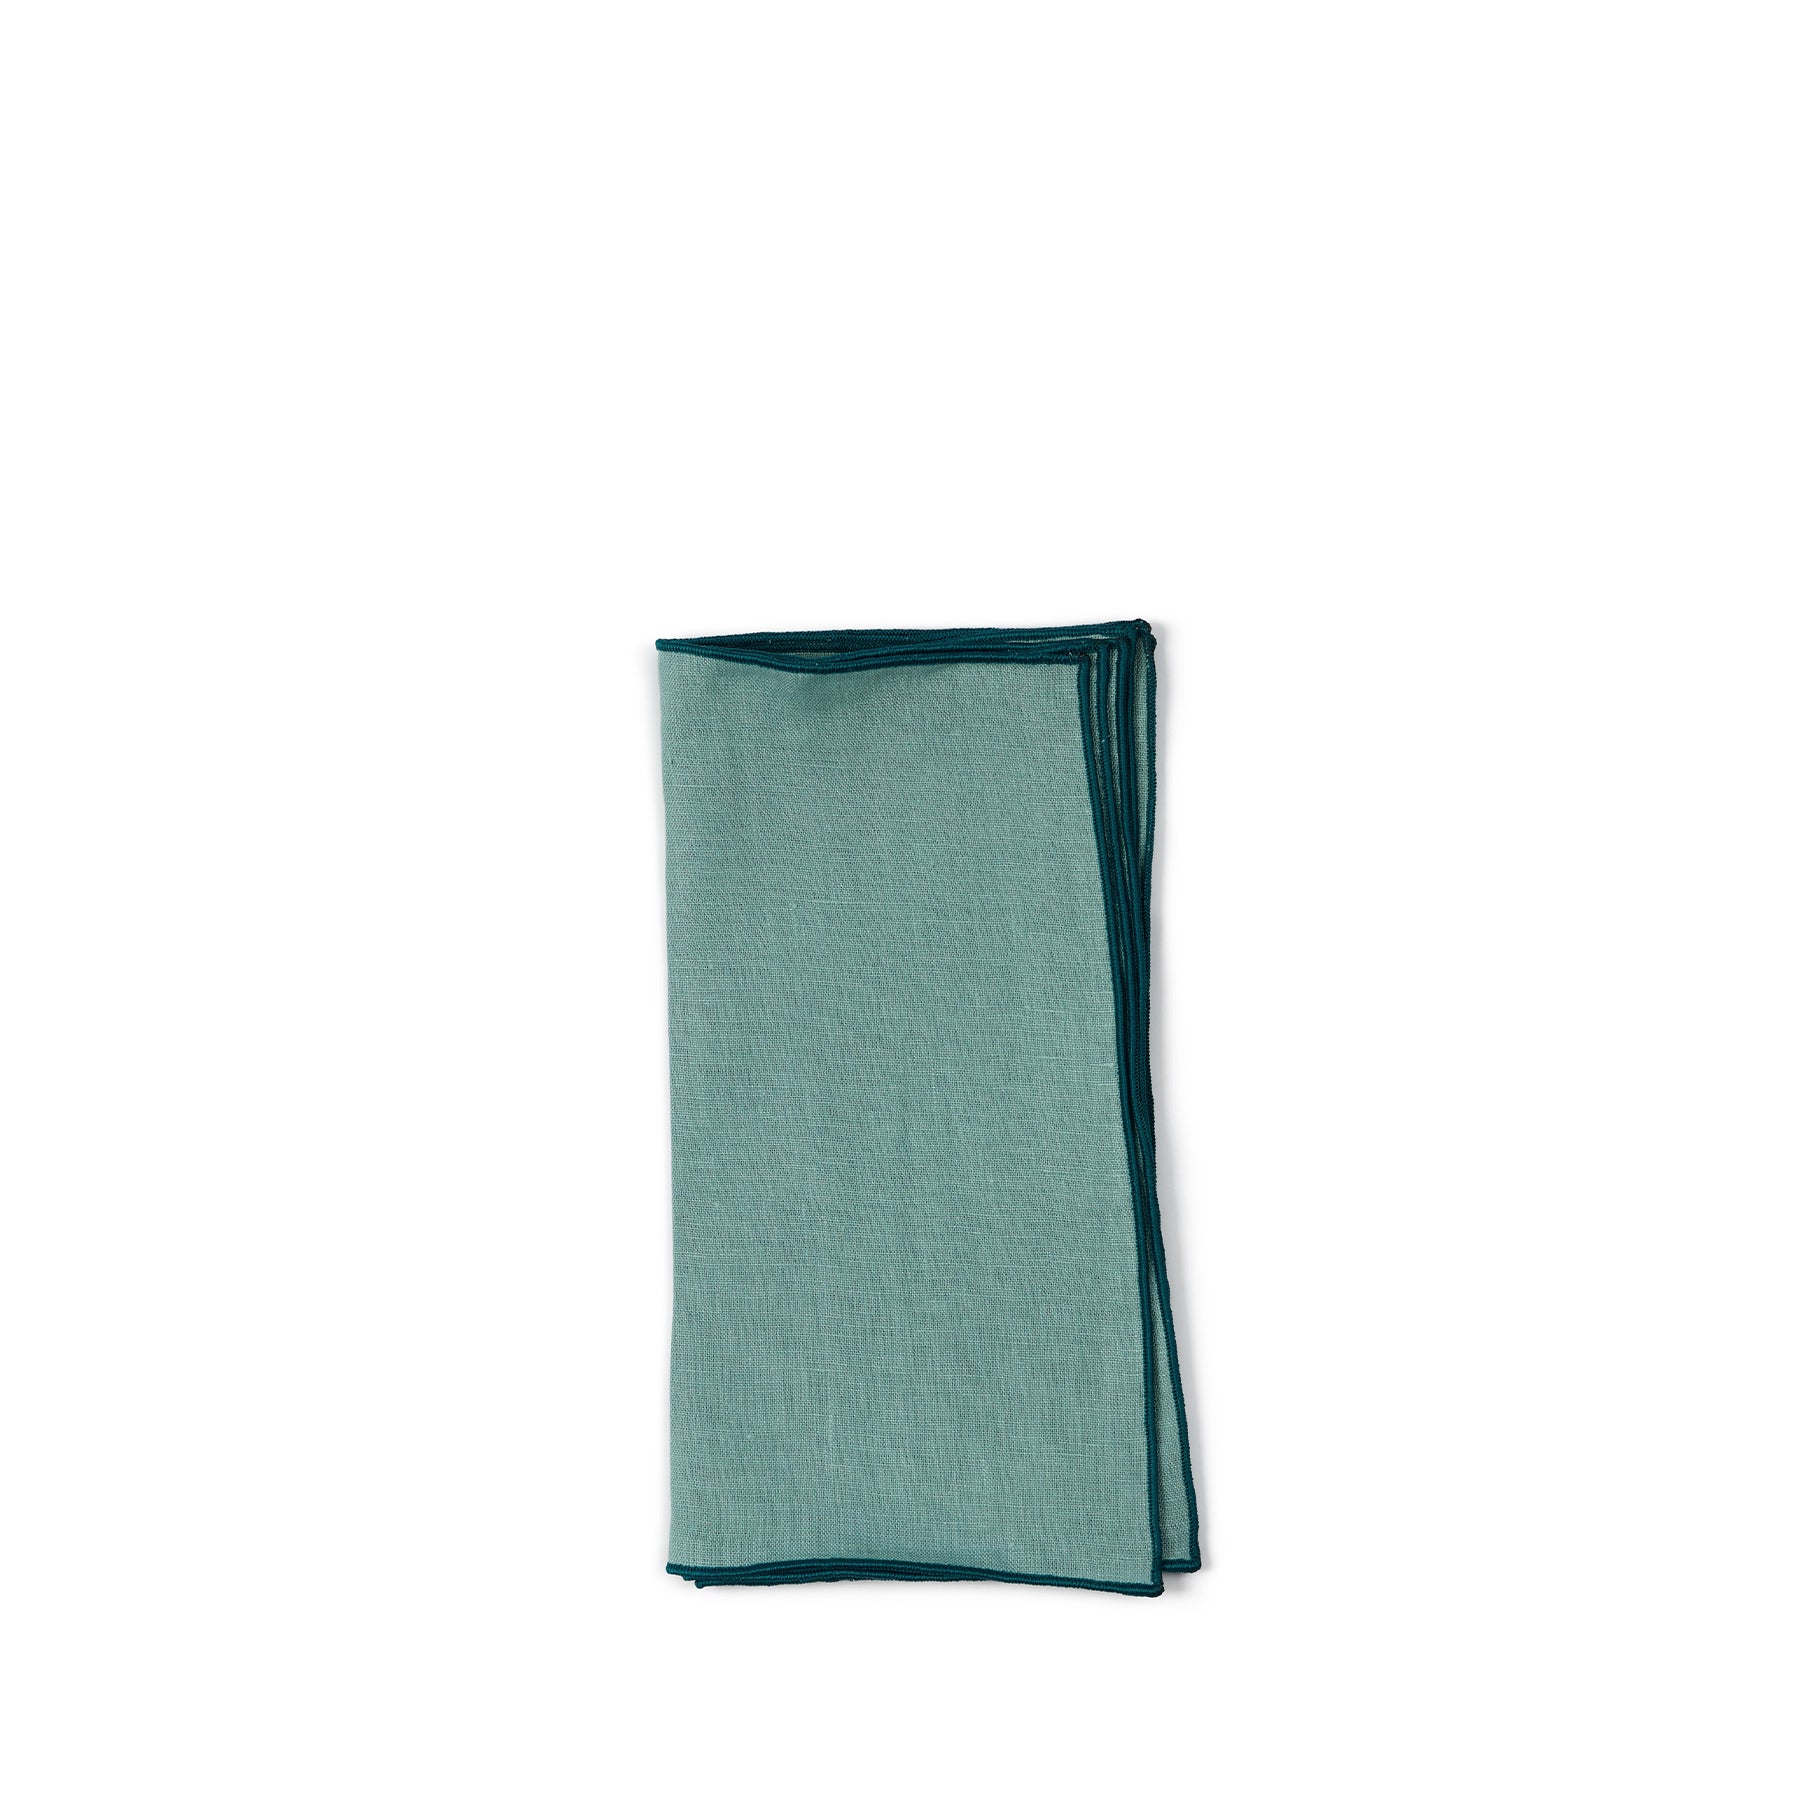 Small Napkin in Turquoise (Set of 4) Zoom Image 1